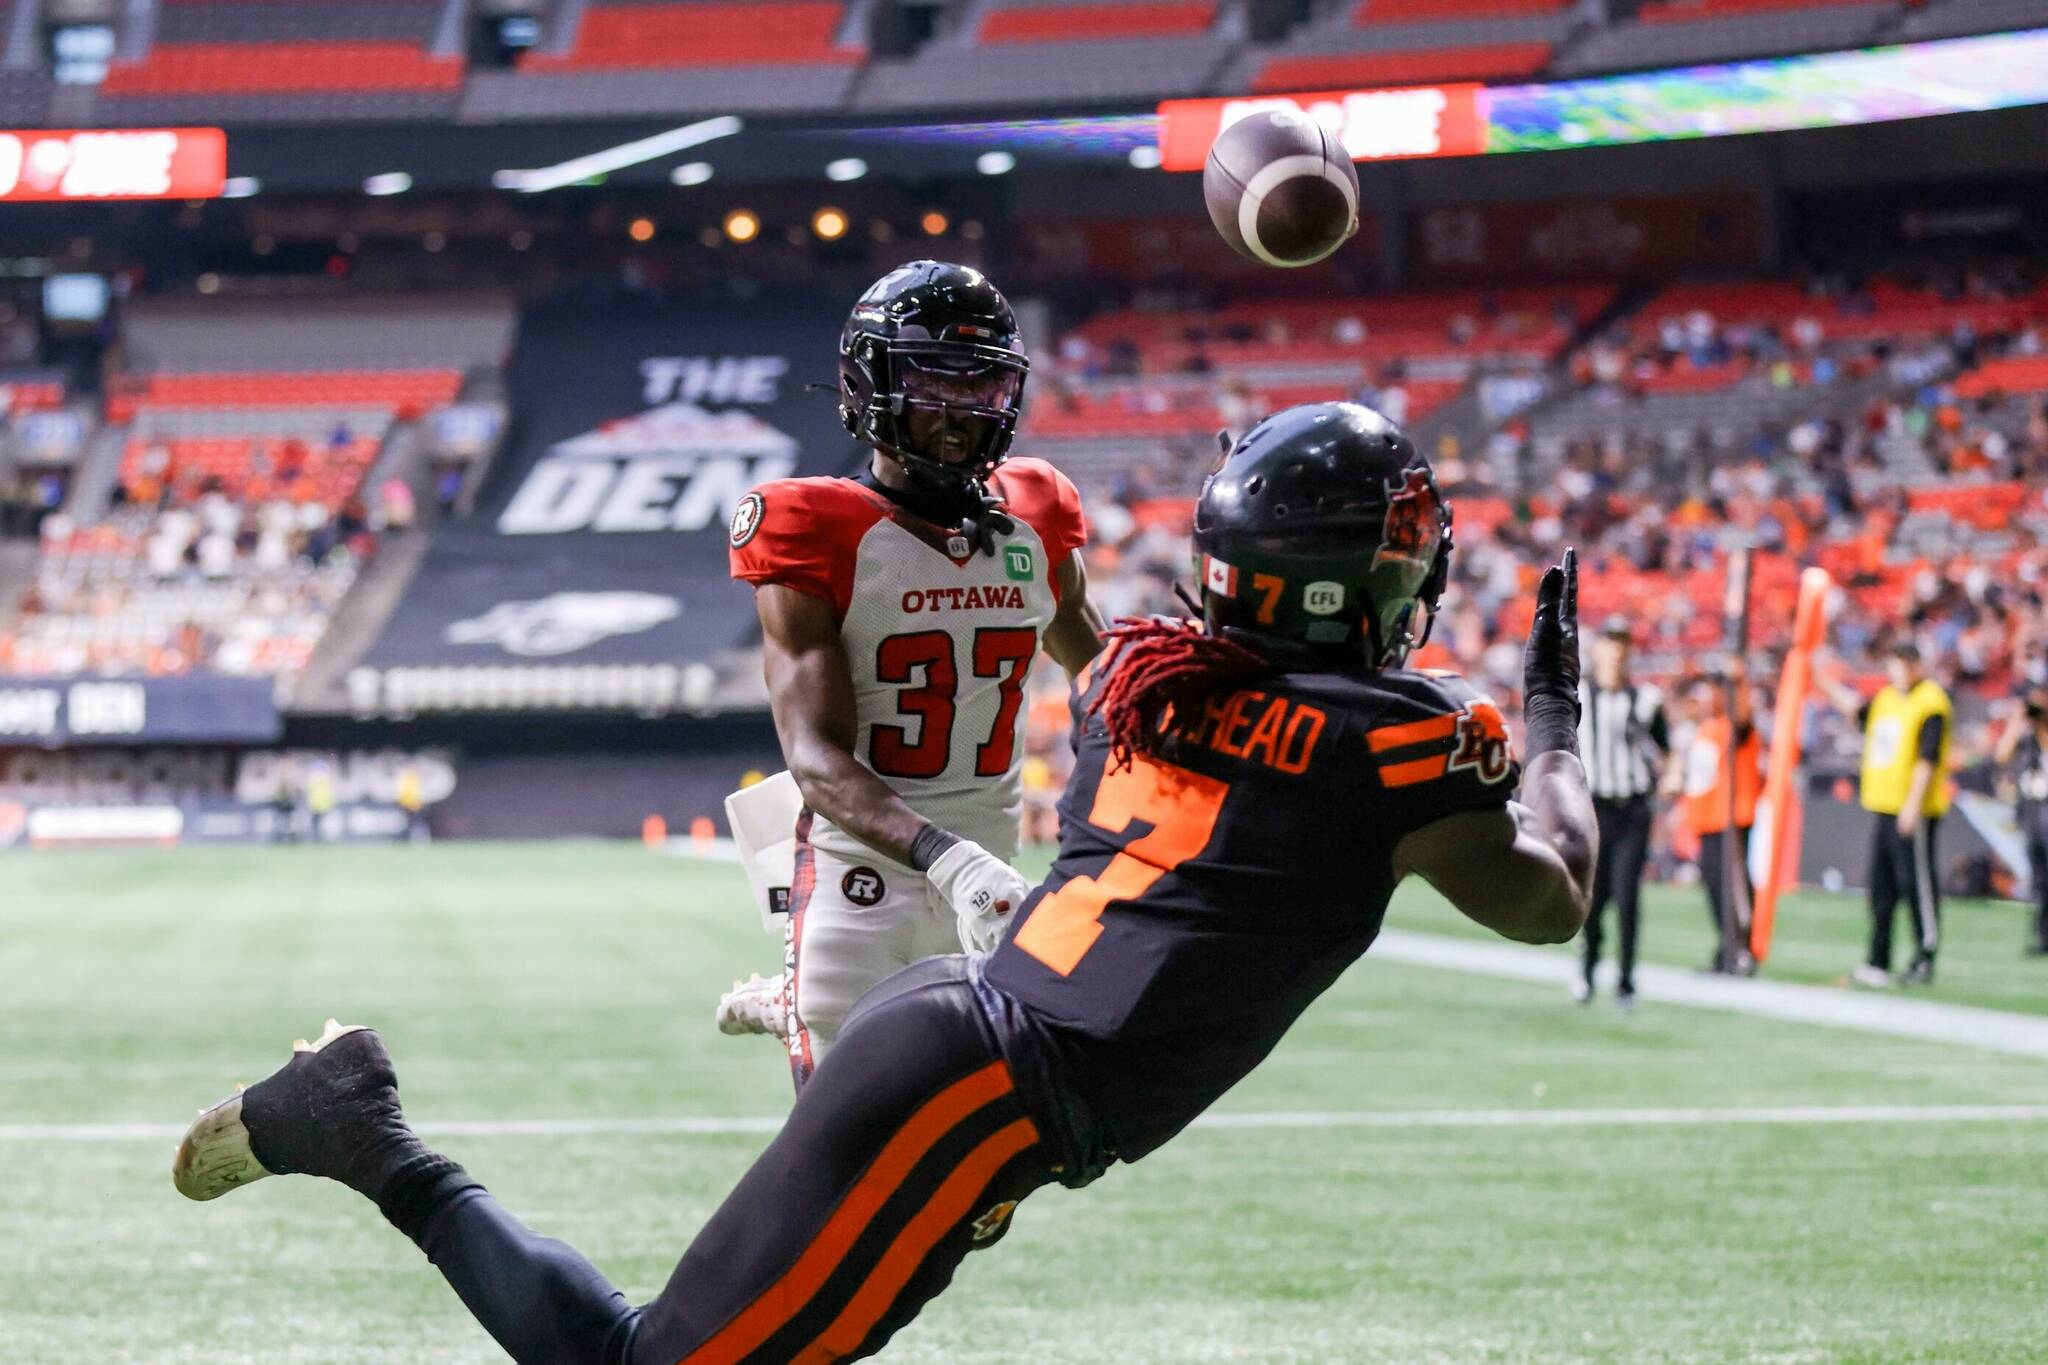 Lucky Whitehead of the B.C. Lions hauls in the game winning touchdown against the Ottawa Redblacks while Ottawa’s Brandin Dandridge can only watch. Steven Chang photo, BC LIONS